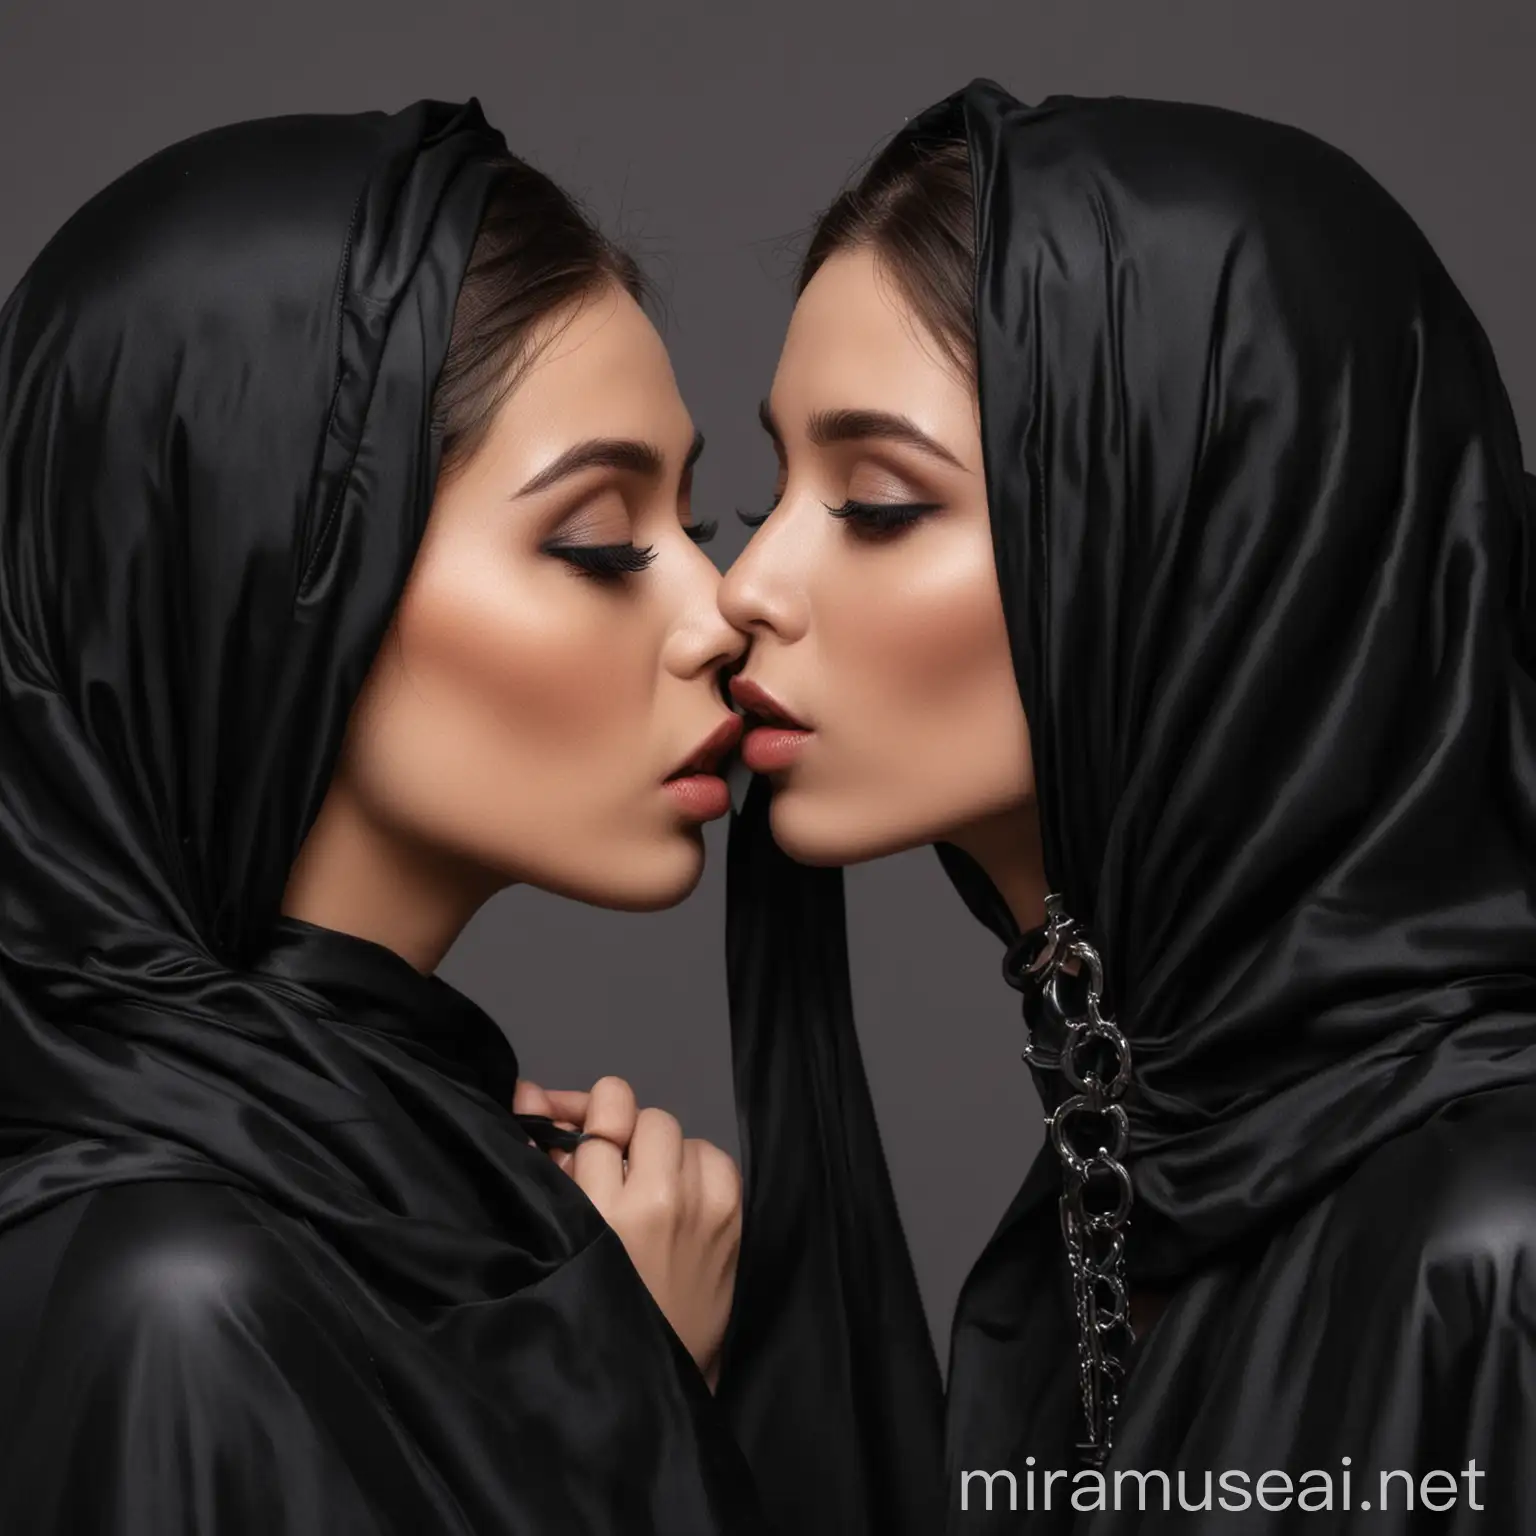 Romantic Moment Two Stylish Women in Black Chador Sharing a Kiss